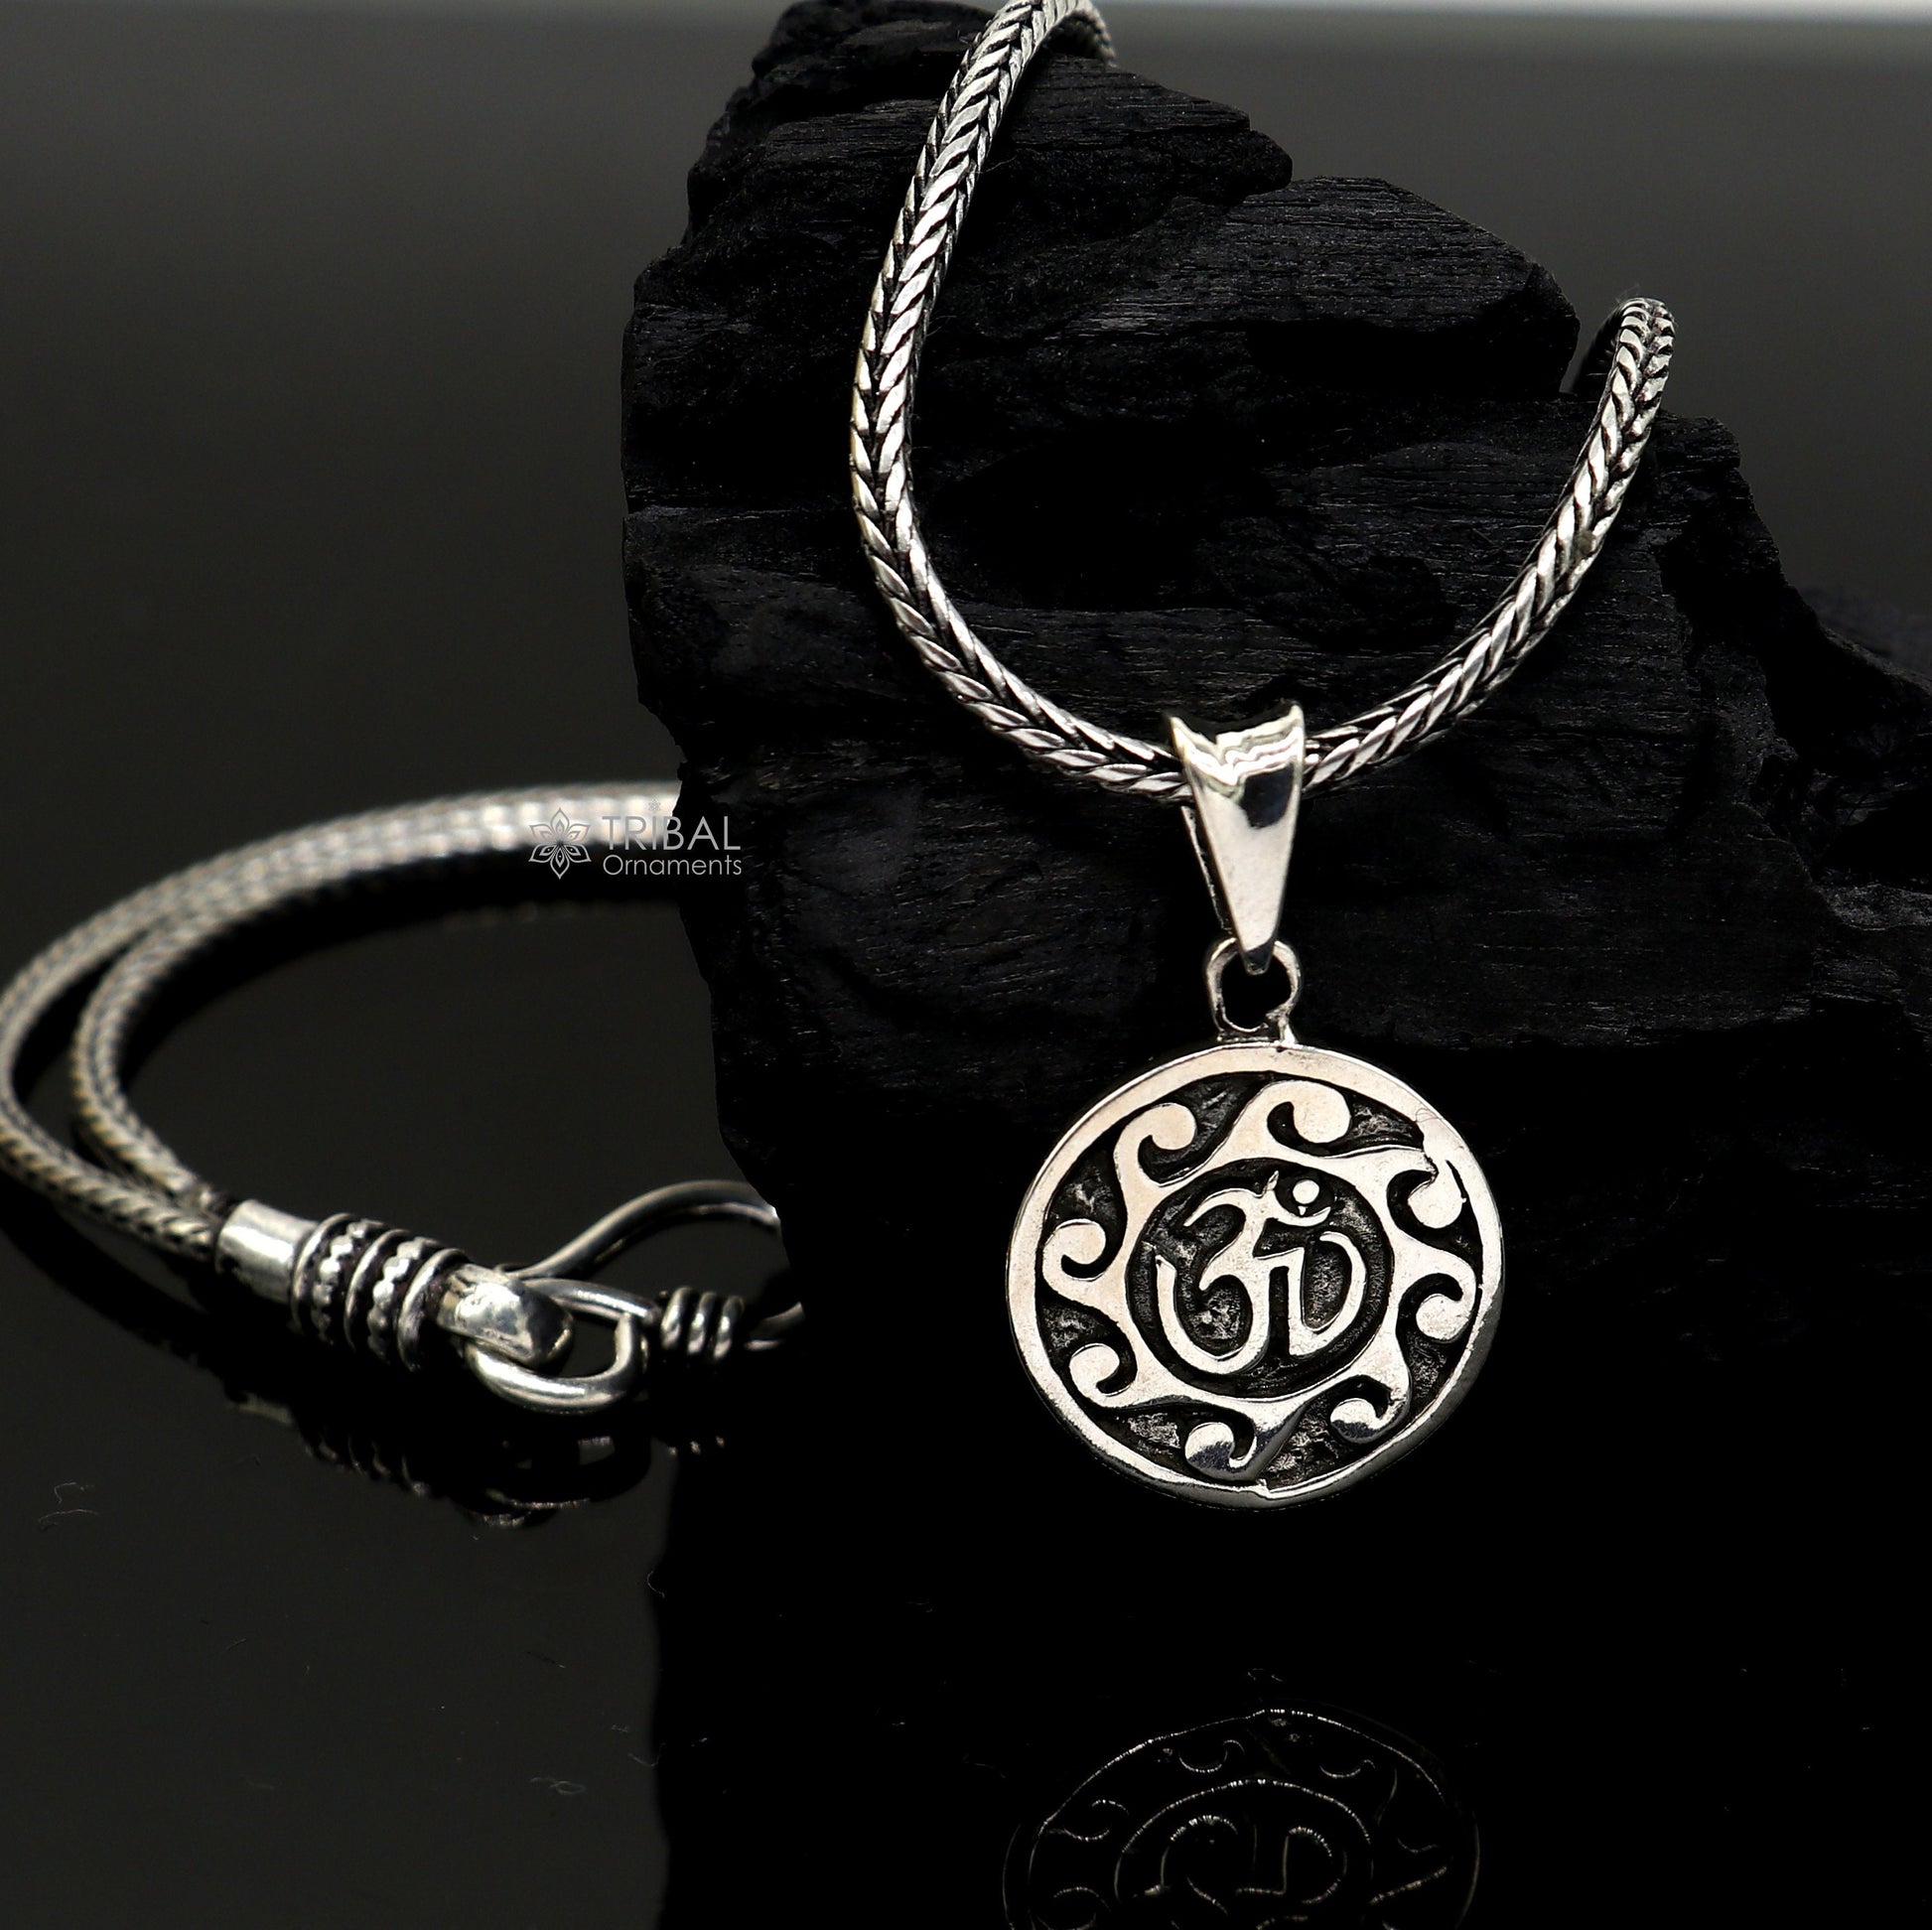 925 sterling silver handmade Divine 'Aum' OM pendant, amazing stylish good luck pendant exclusive jewelry tribal jewelry  nsp677 - TRIBAL ORNAMENTS